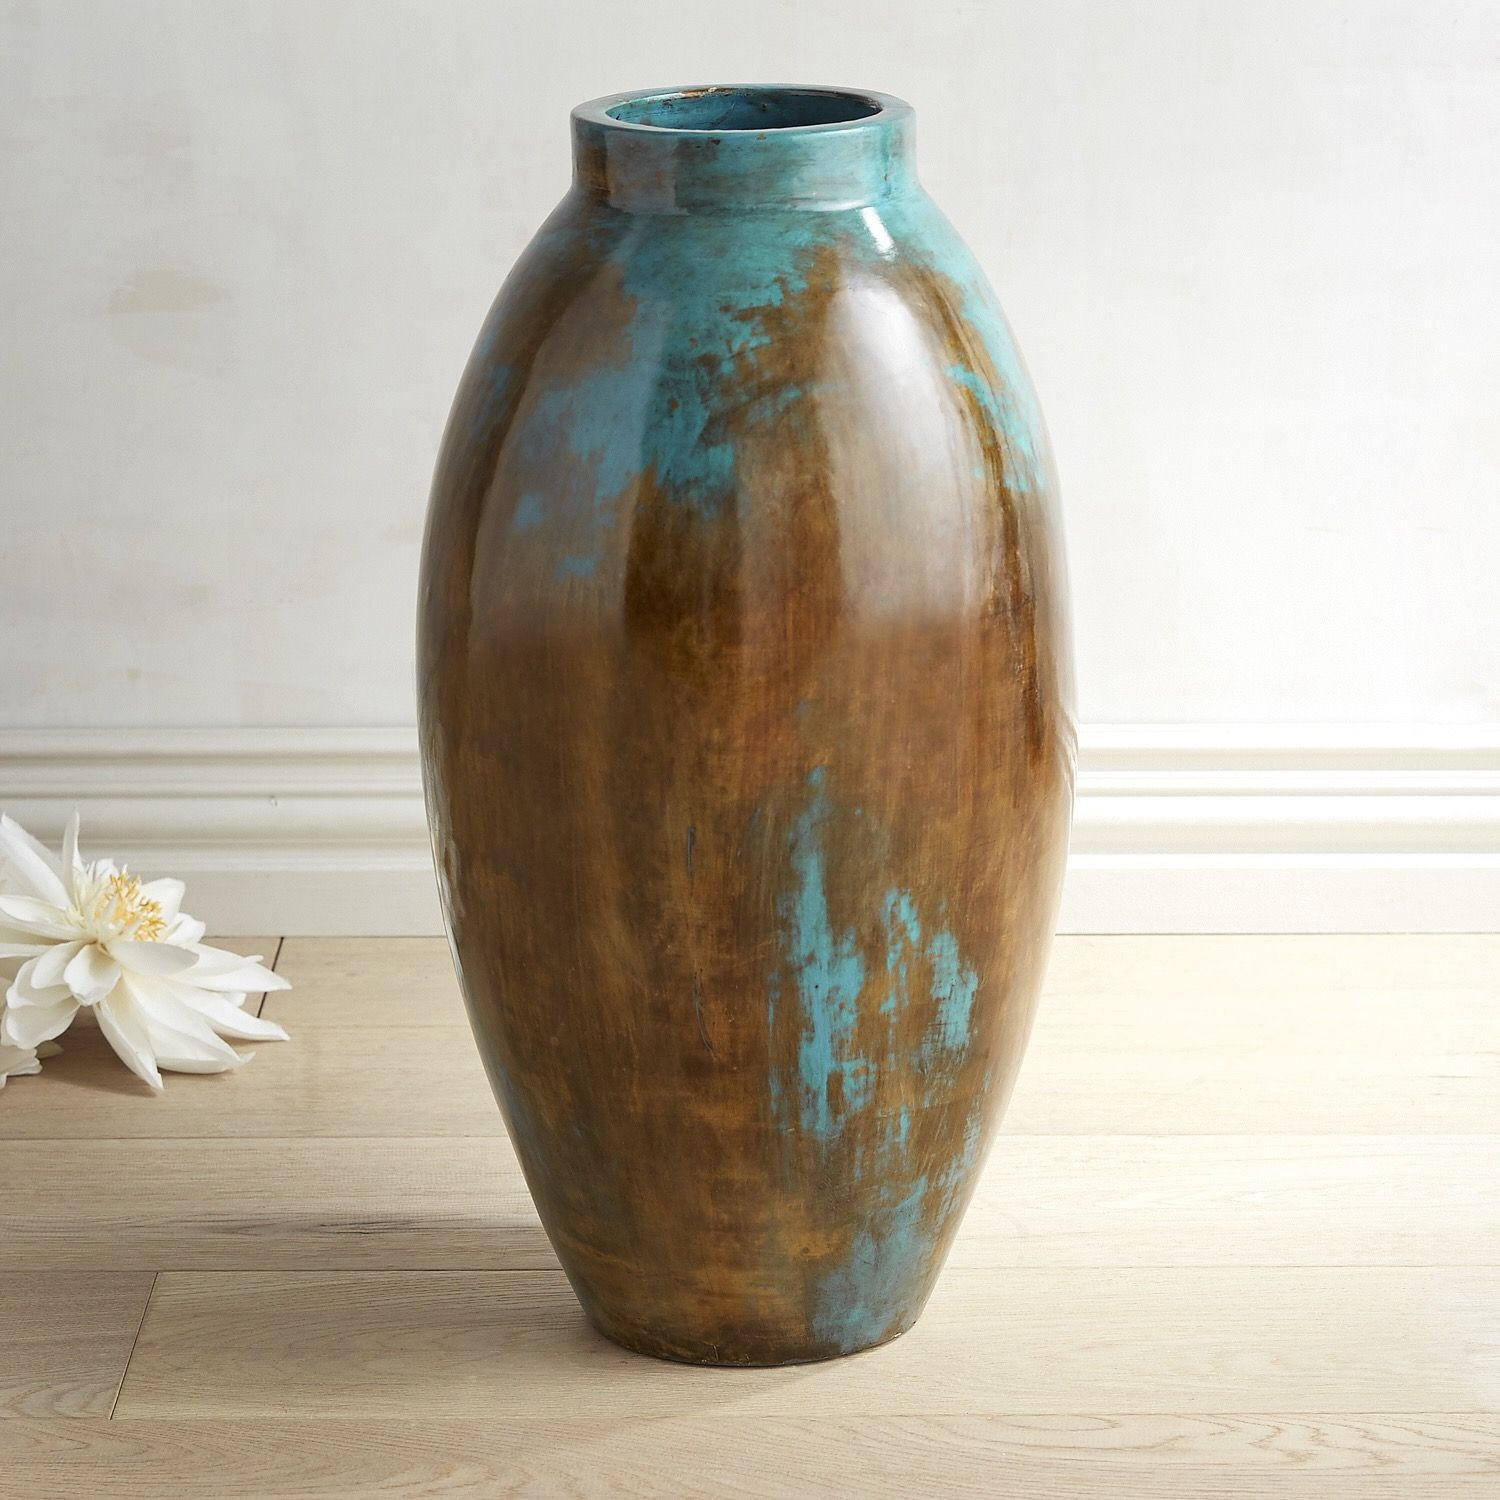 10 Fashionable Extra Large Decorative Floor Vases 2024 free download extra large decorative floor vases of blue brown oval floor vase products pinterest vase vases in blue brown oval floor vase